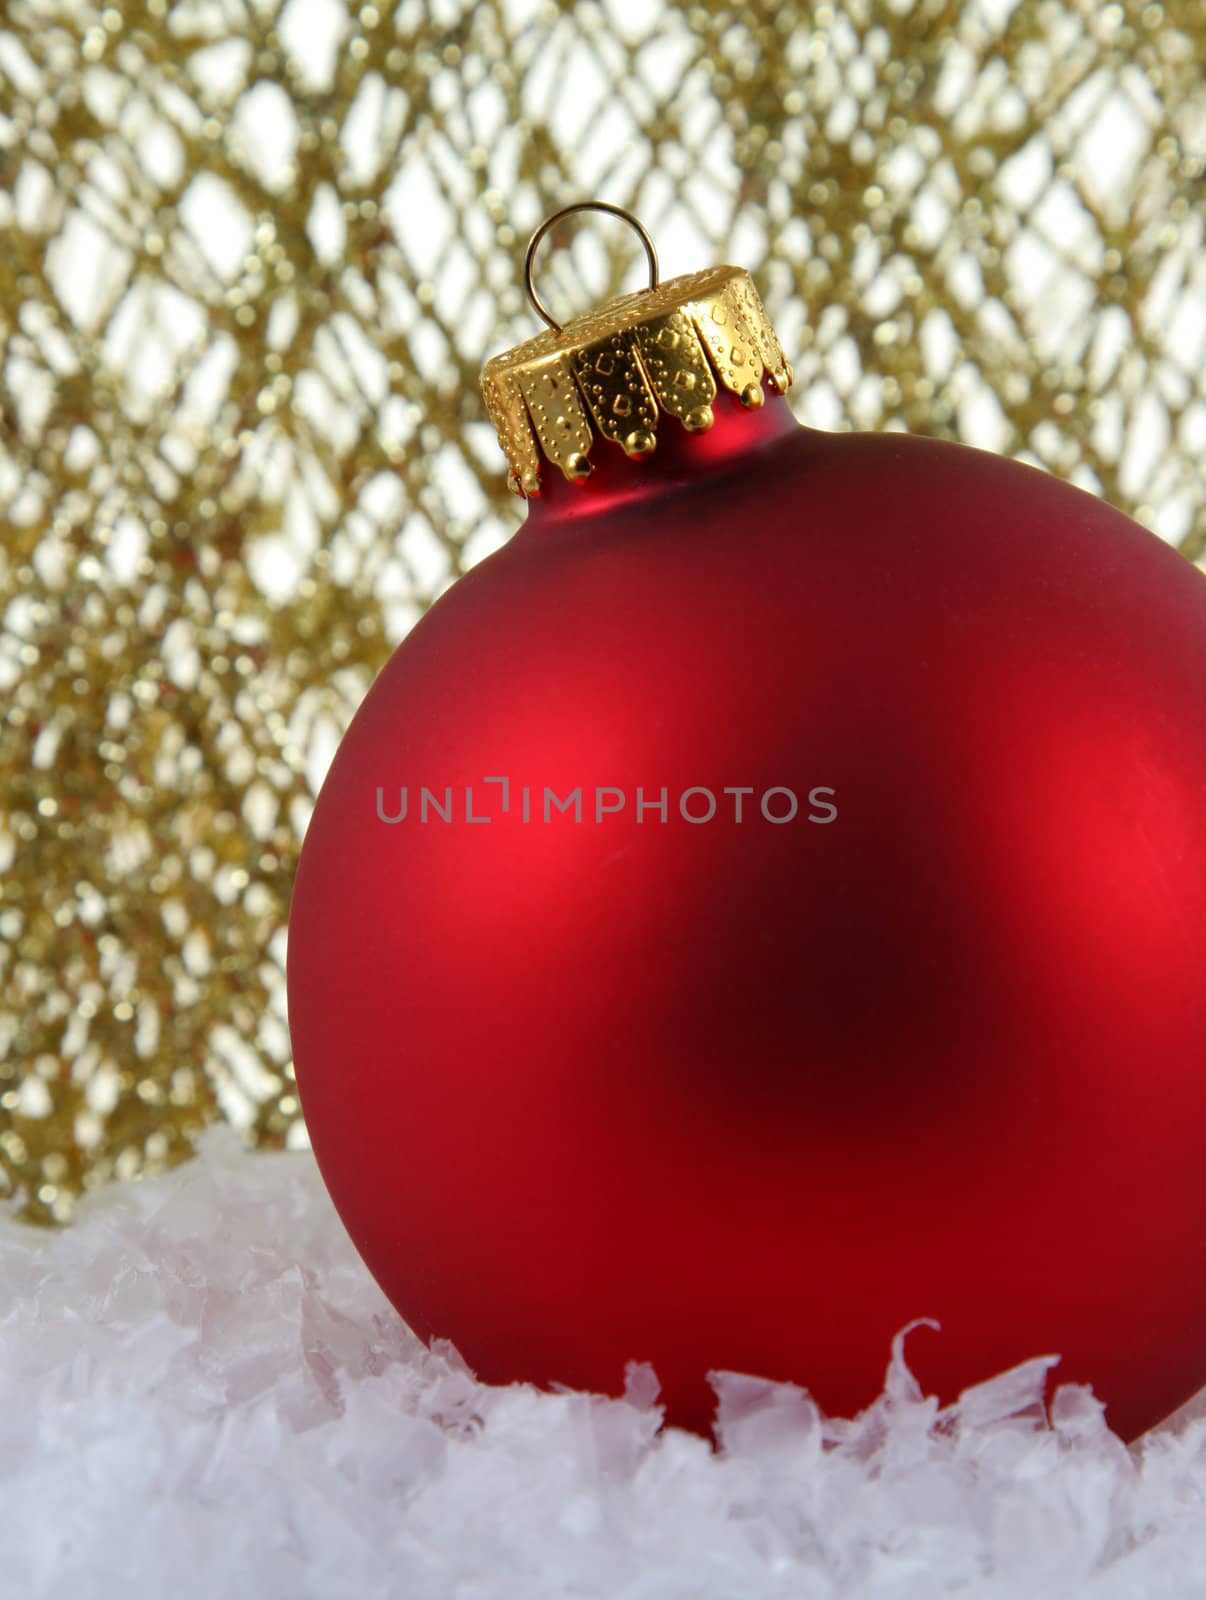 A red Christmas bauble backed by gold glittery strings.